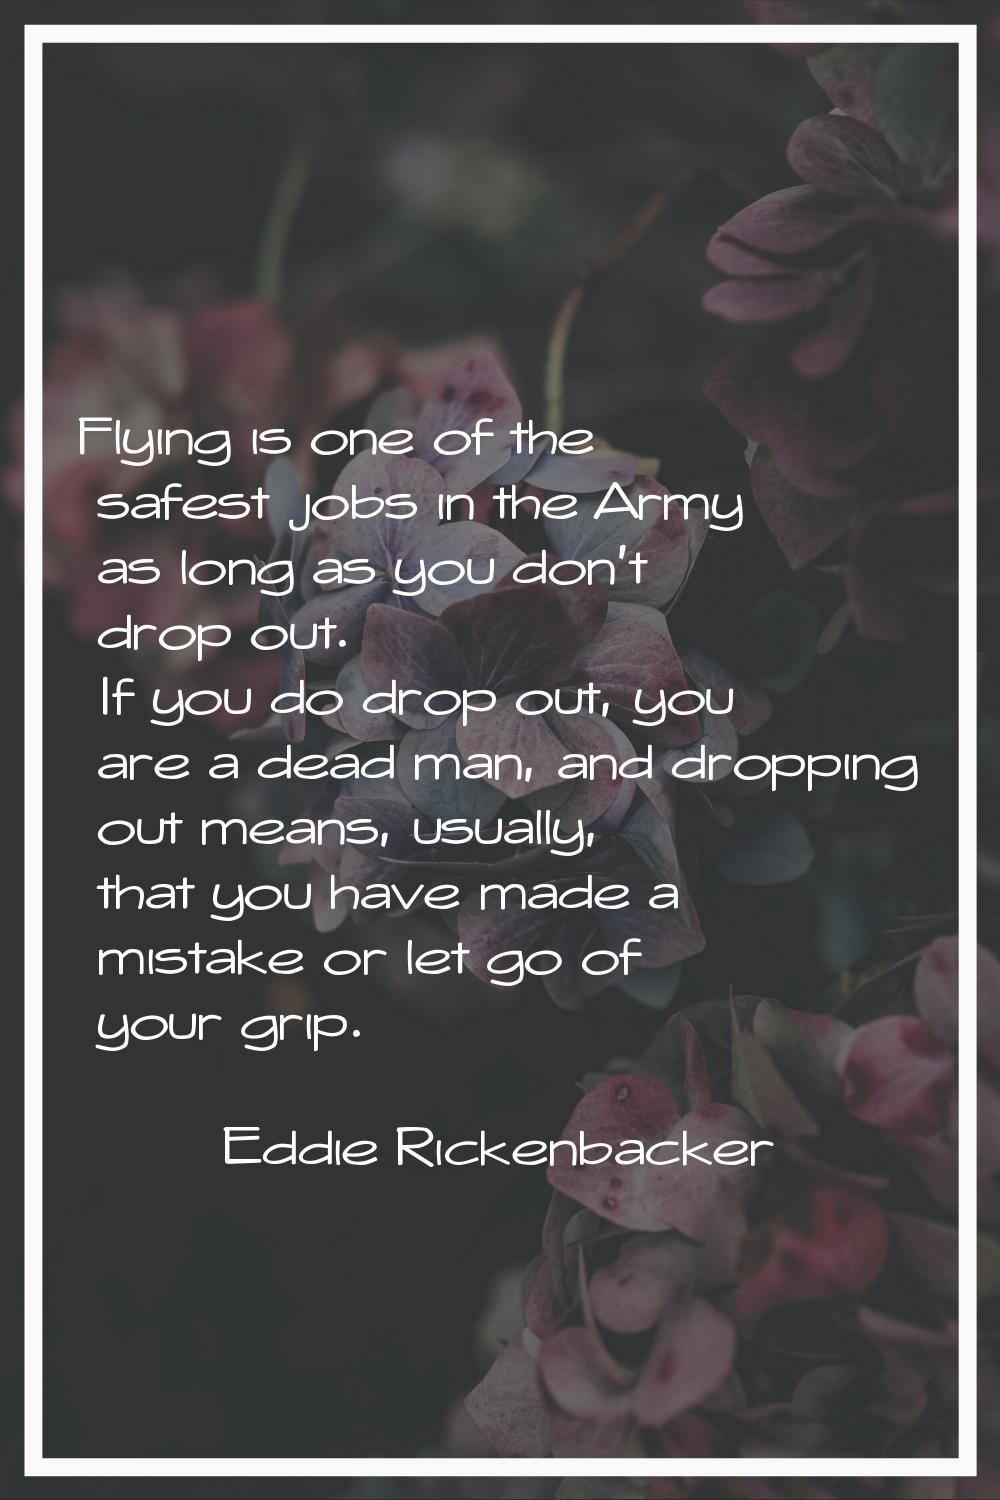 Flying is one of the safest jobs in the Army as long as you don't drop out. If you do drop out, you